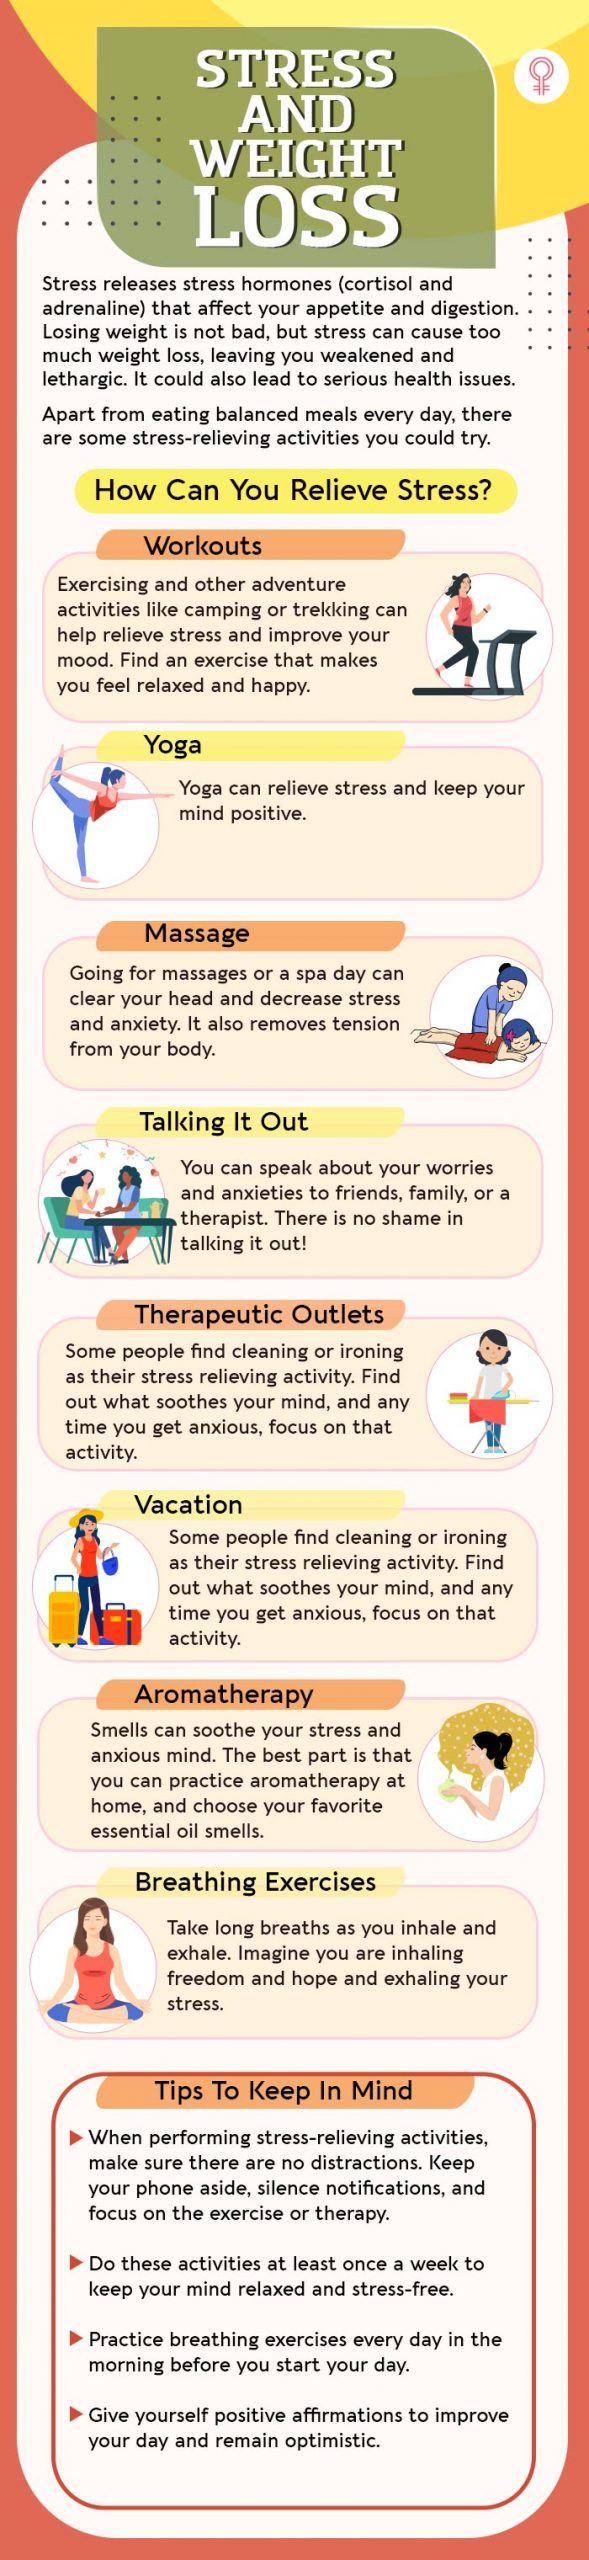 tips to control weight loss due to stress [infographic]